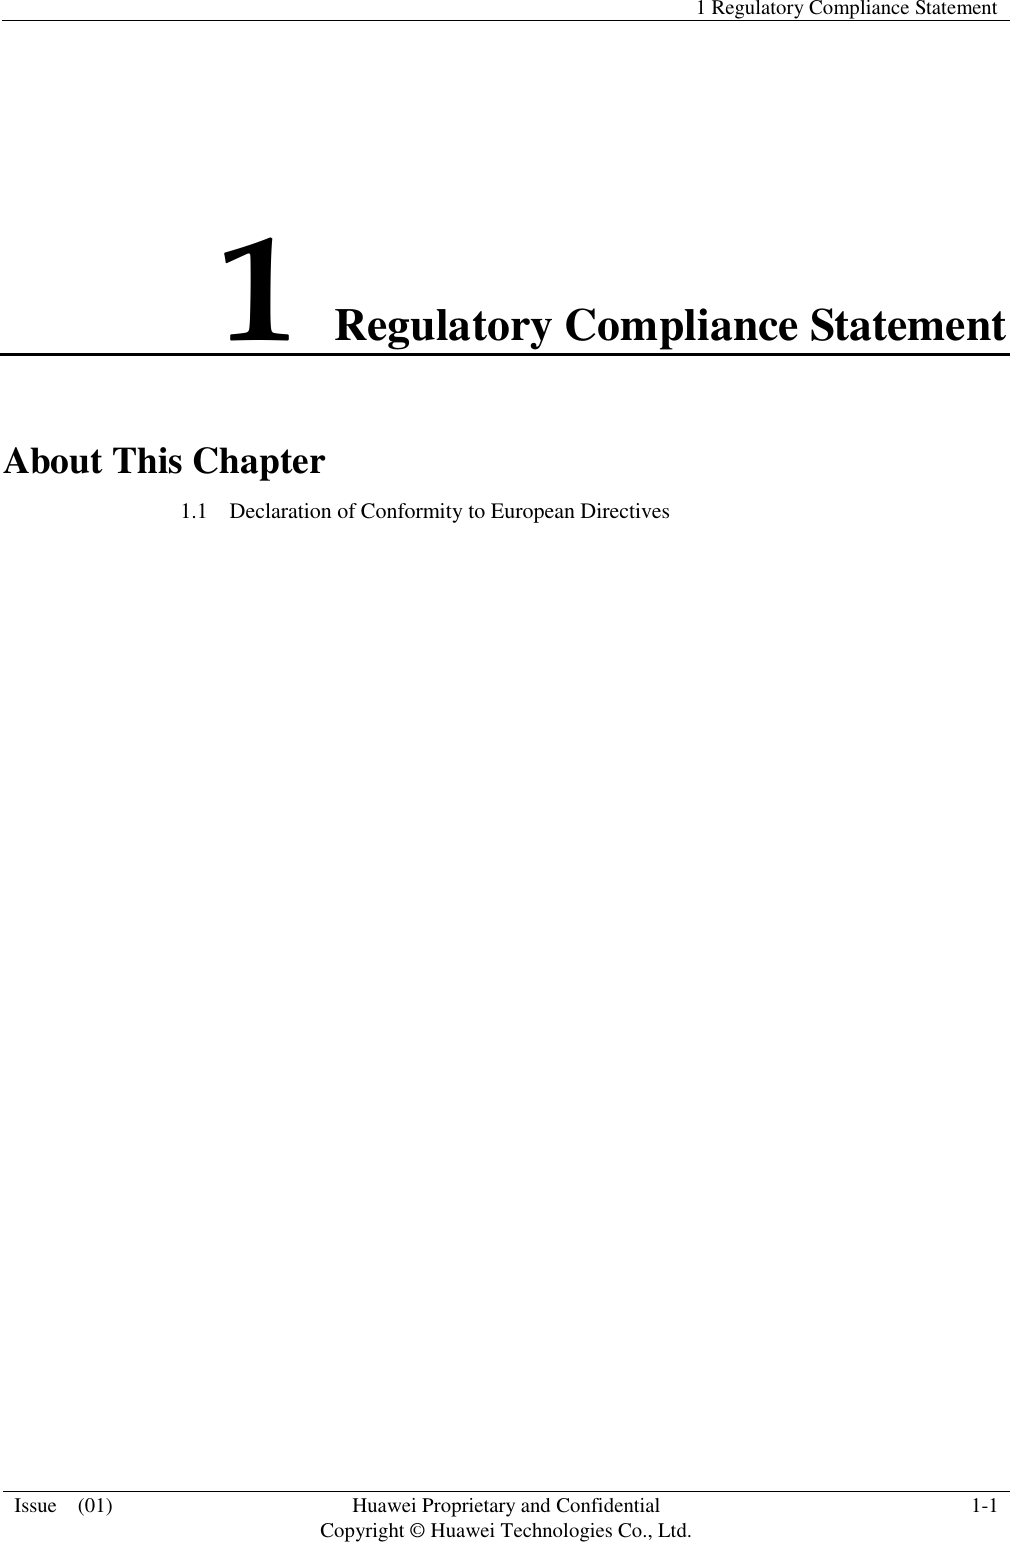   1 Regulatory Compliance Statement  Issue    (01) Huawei Proprietary and Confidential                                     Copyright © Huawei Technologies Co., Ltd. 1-1  1 Regulatory Compliance Statement About This Chapter 1.1    Declaration of Conformity to European Directives  